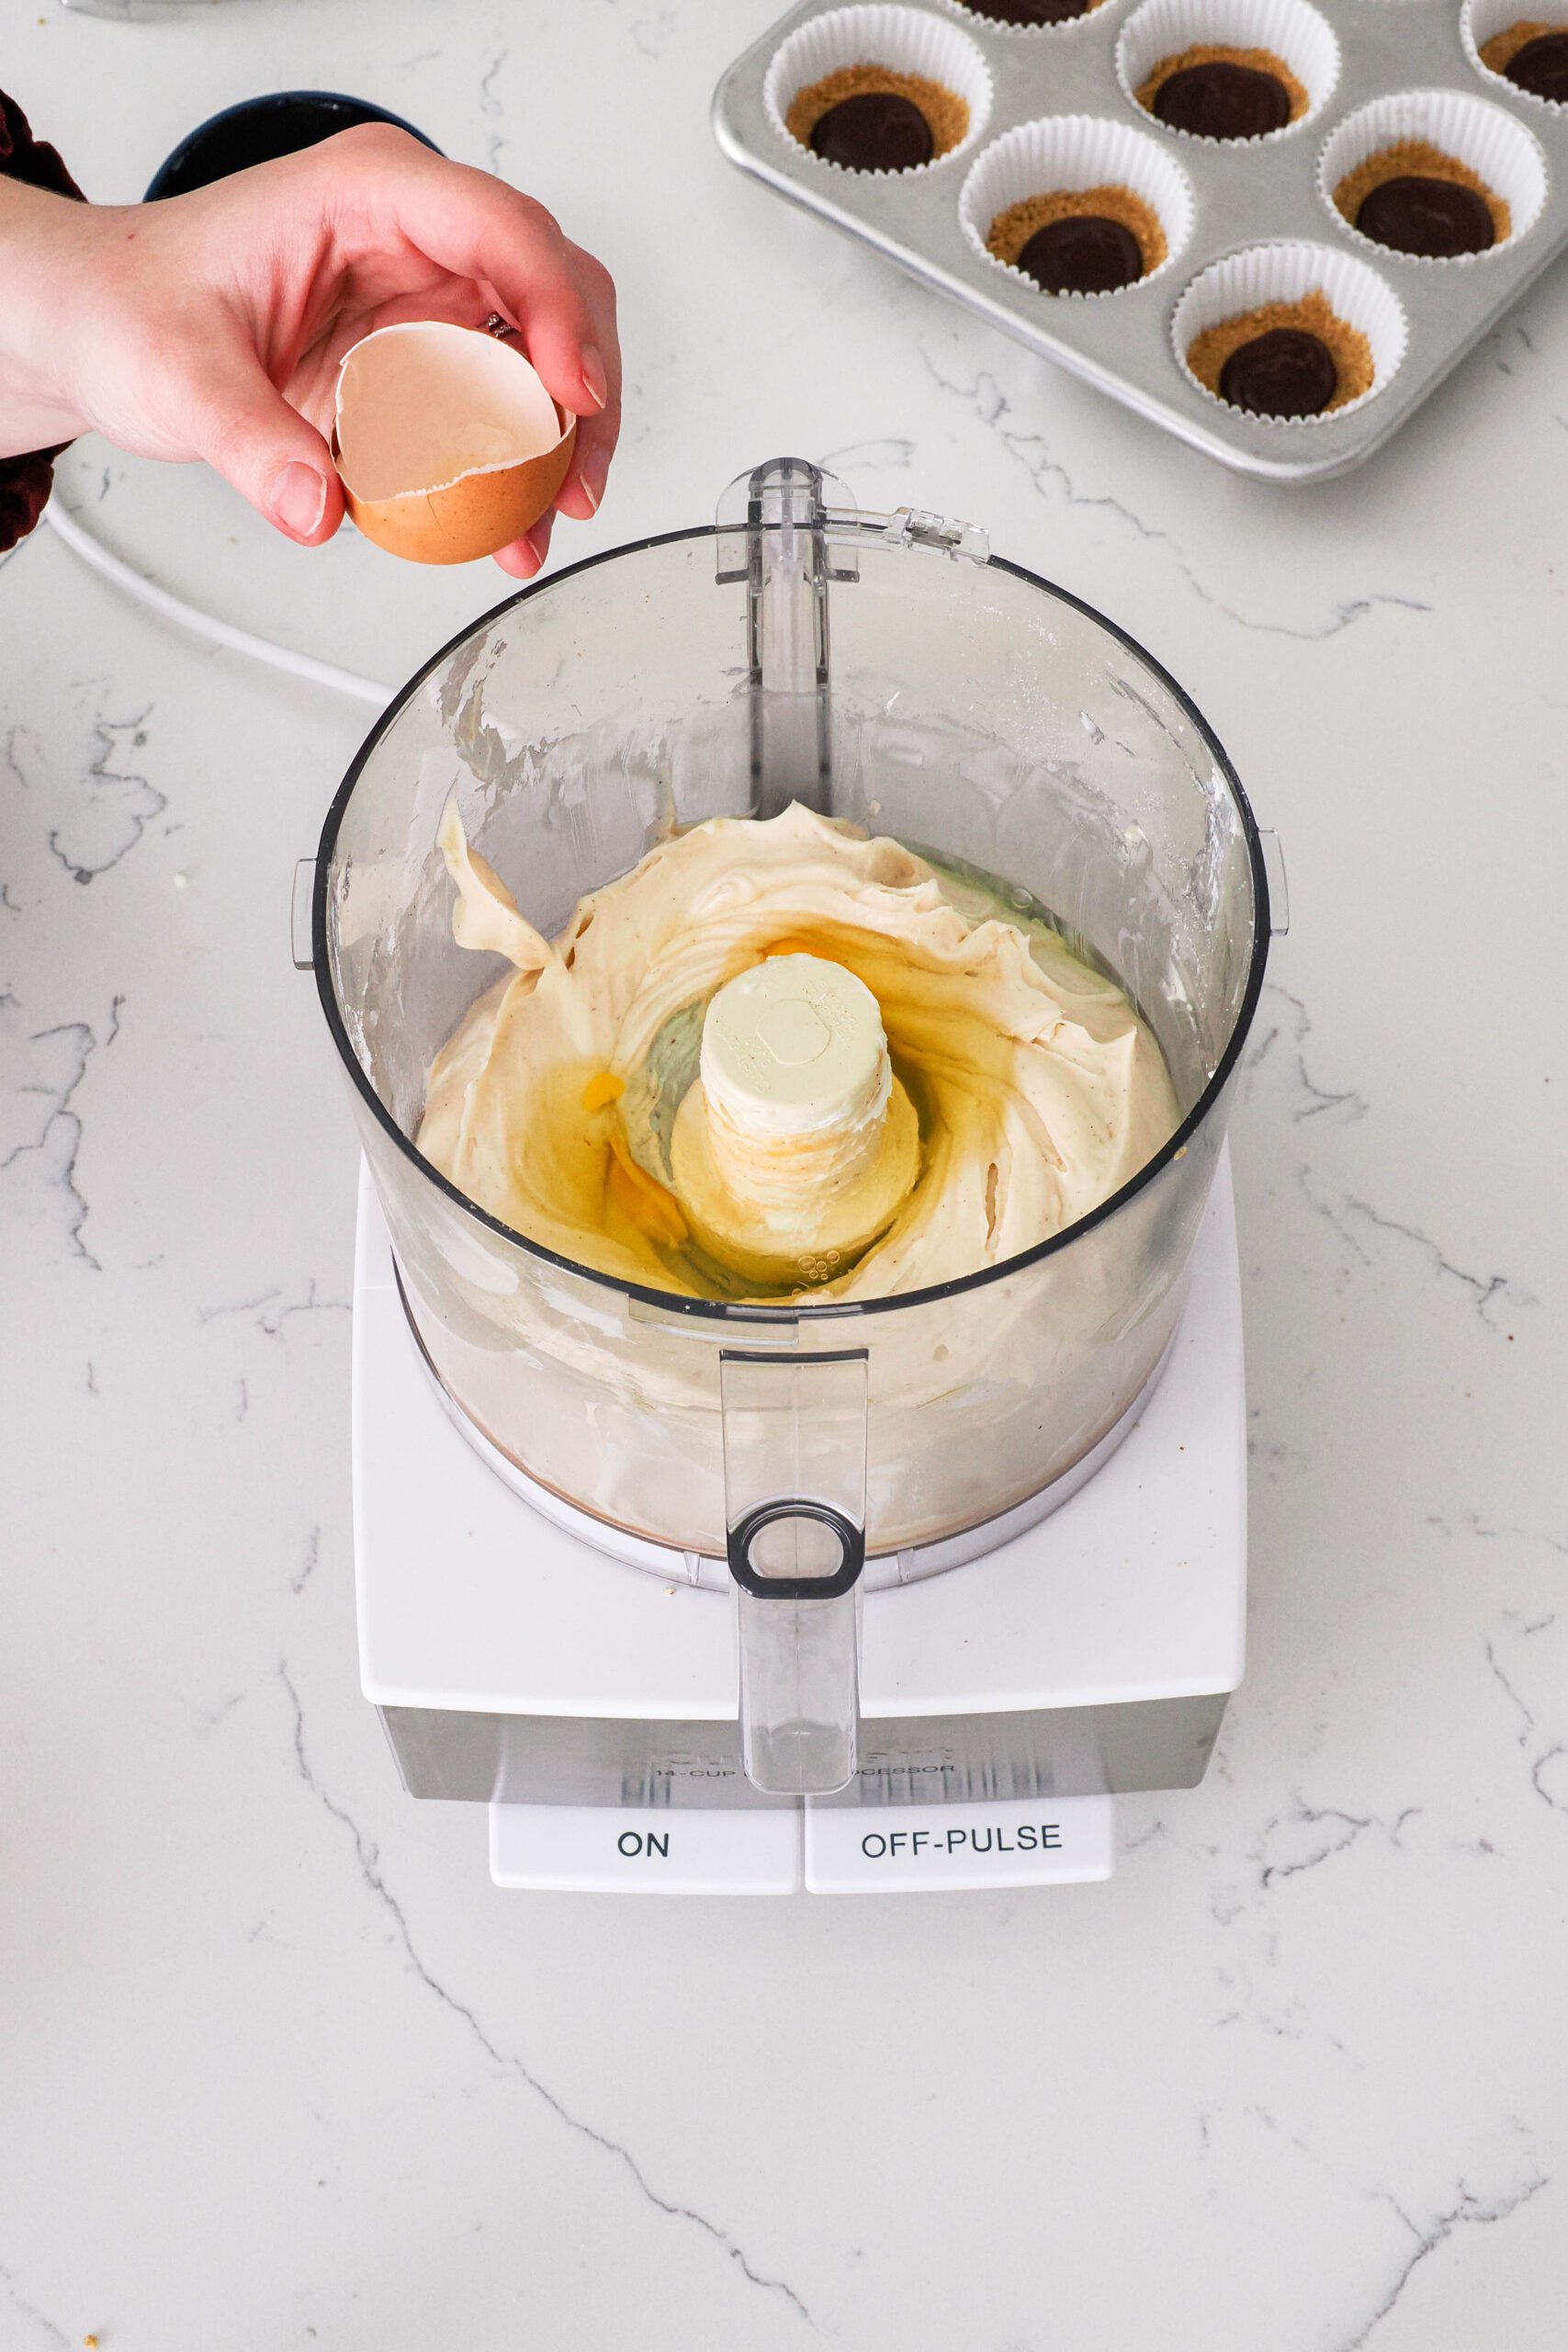 A hand cracks eggs into the bowl of a food processor with caramel cheesecake filling.